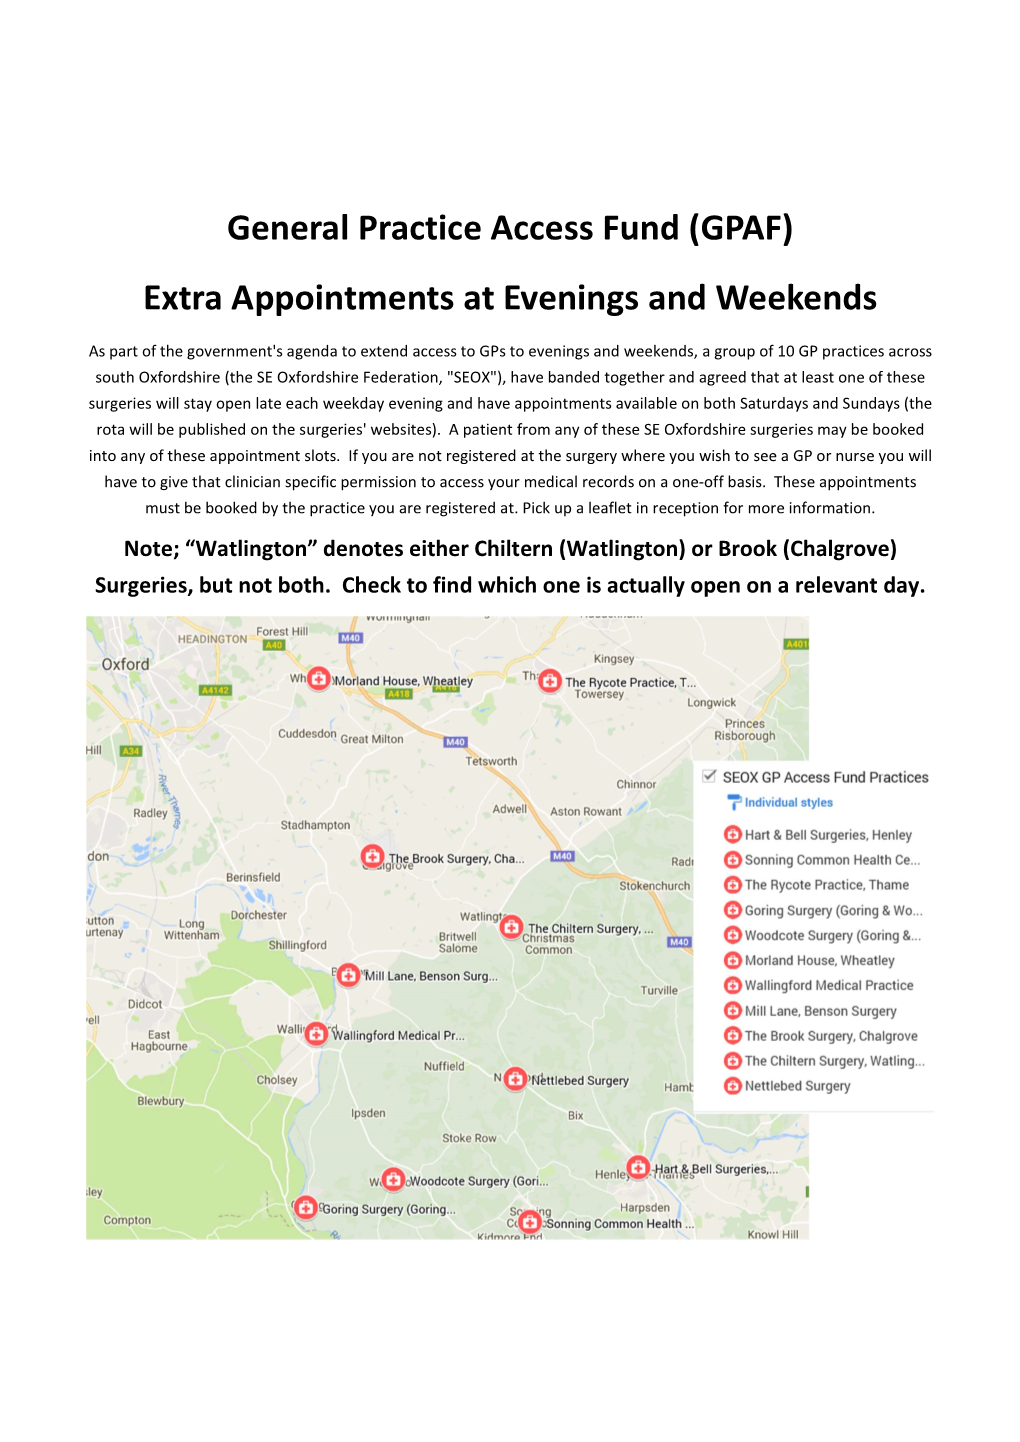 General Practice Access Fund (GPAF) Extra Appointments at Evenings and Weekends